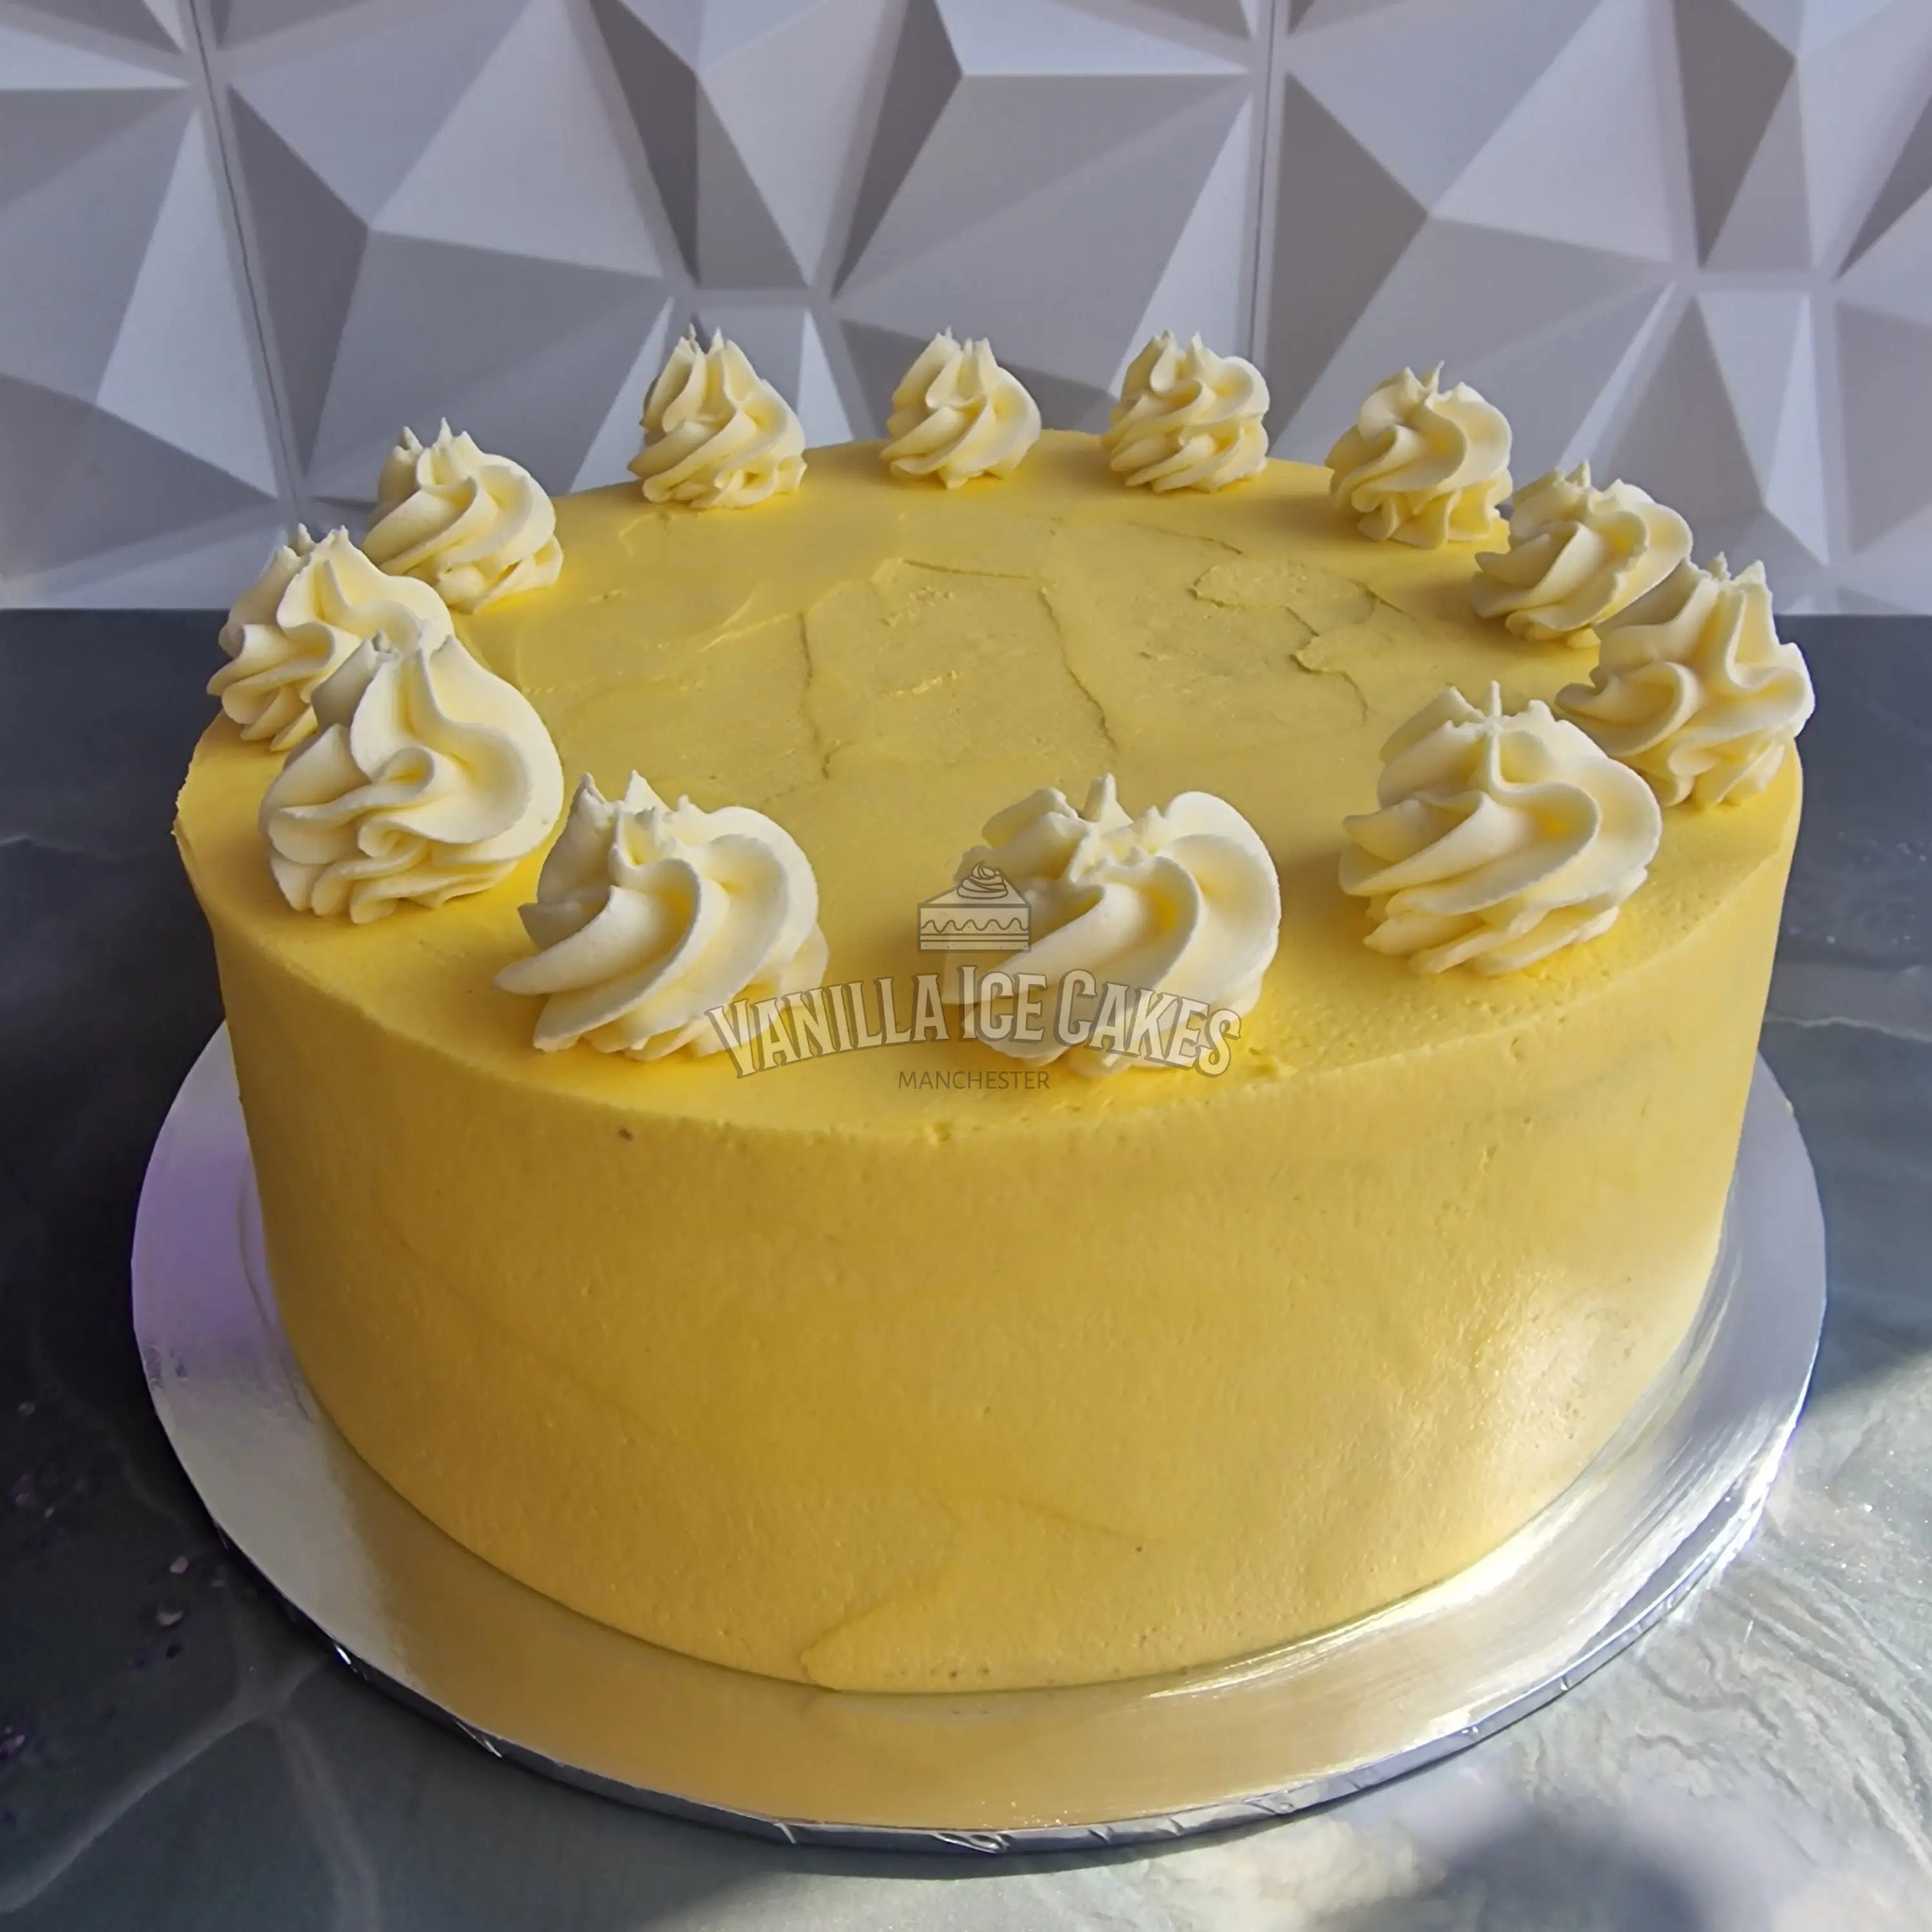 Online Cakes|Online Cakes Delivery|Buy, Order,Send Cakes Online|Cakes to  Mumbai